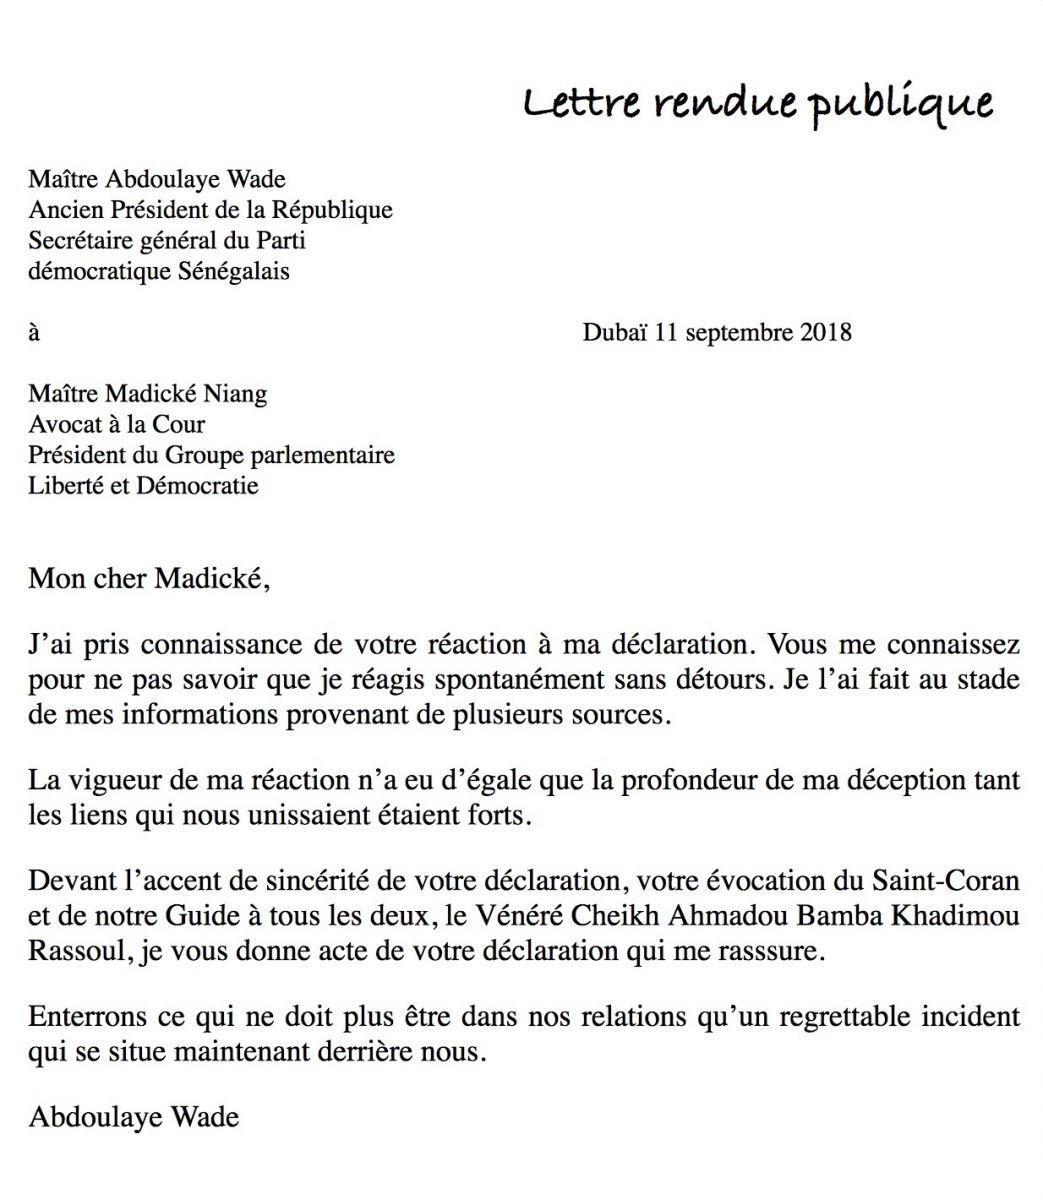 Lettre de Abdoulaye Wade à Me Madické Niang